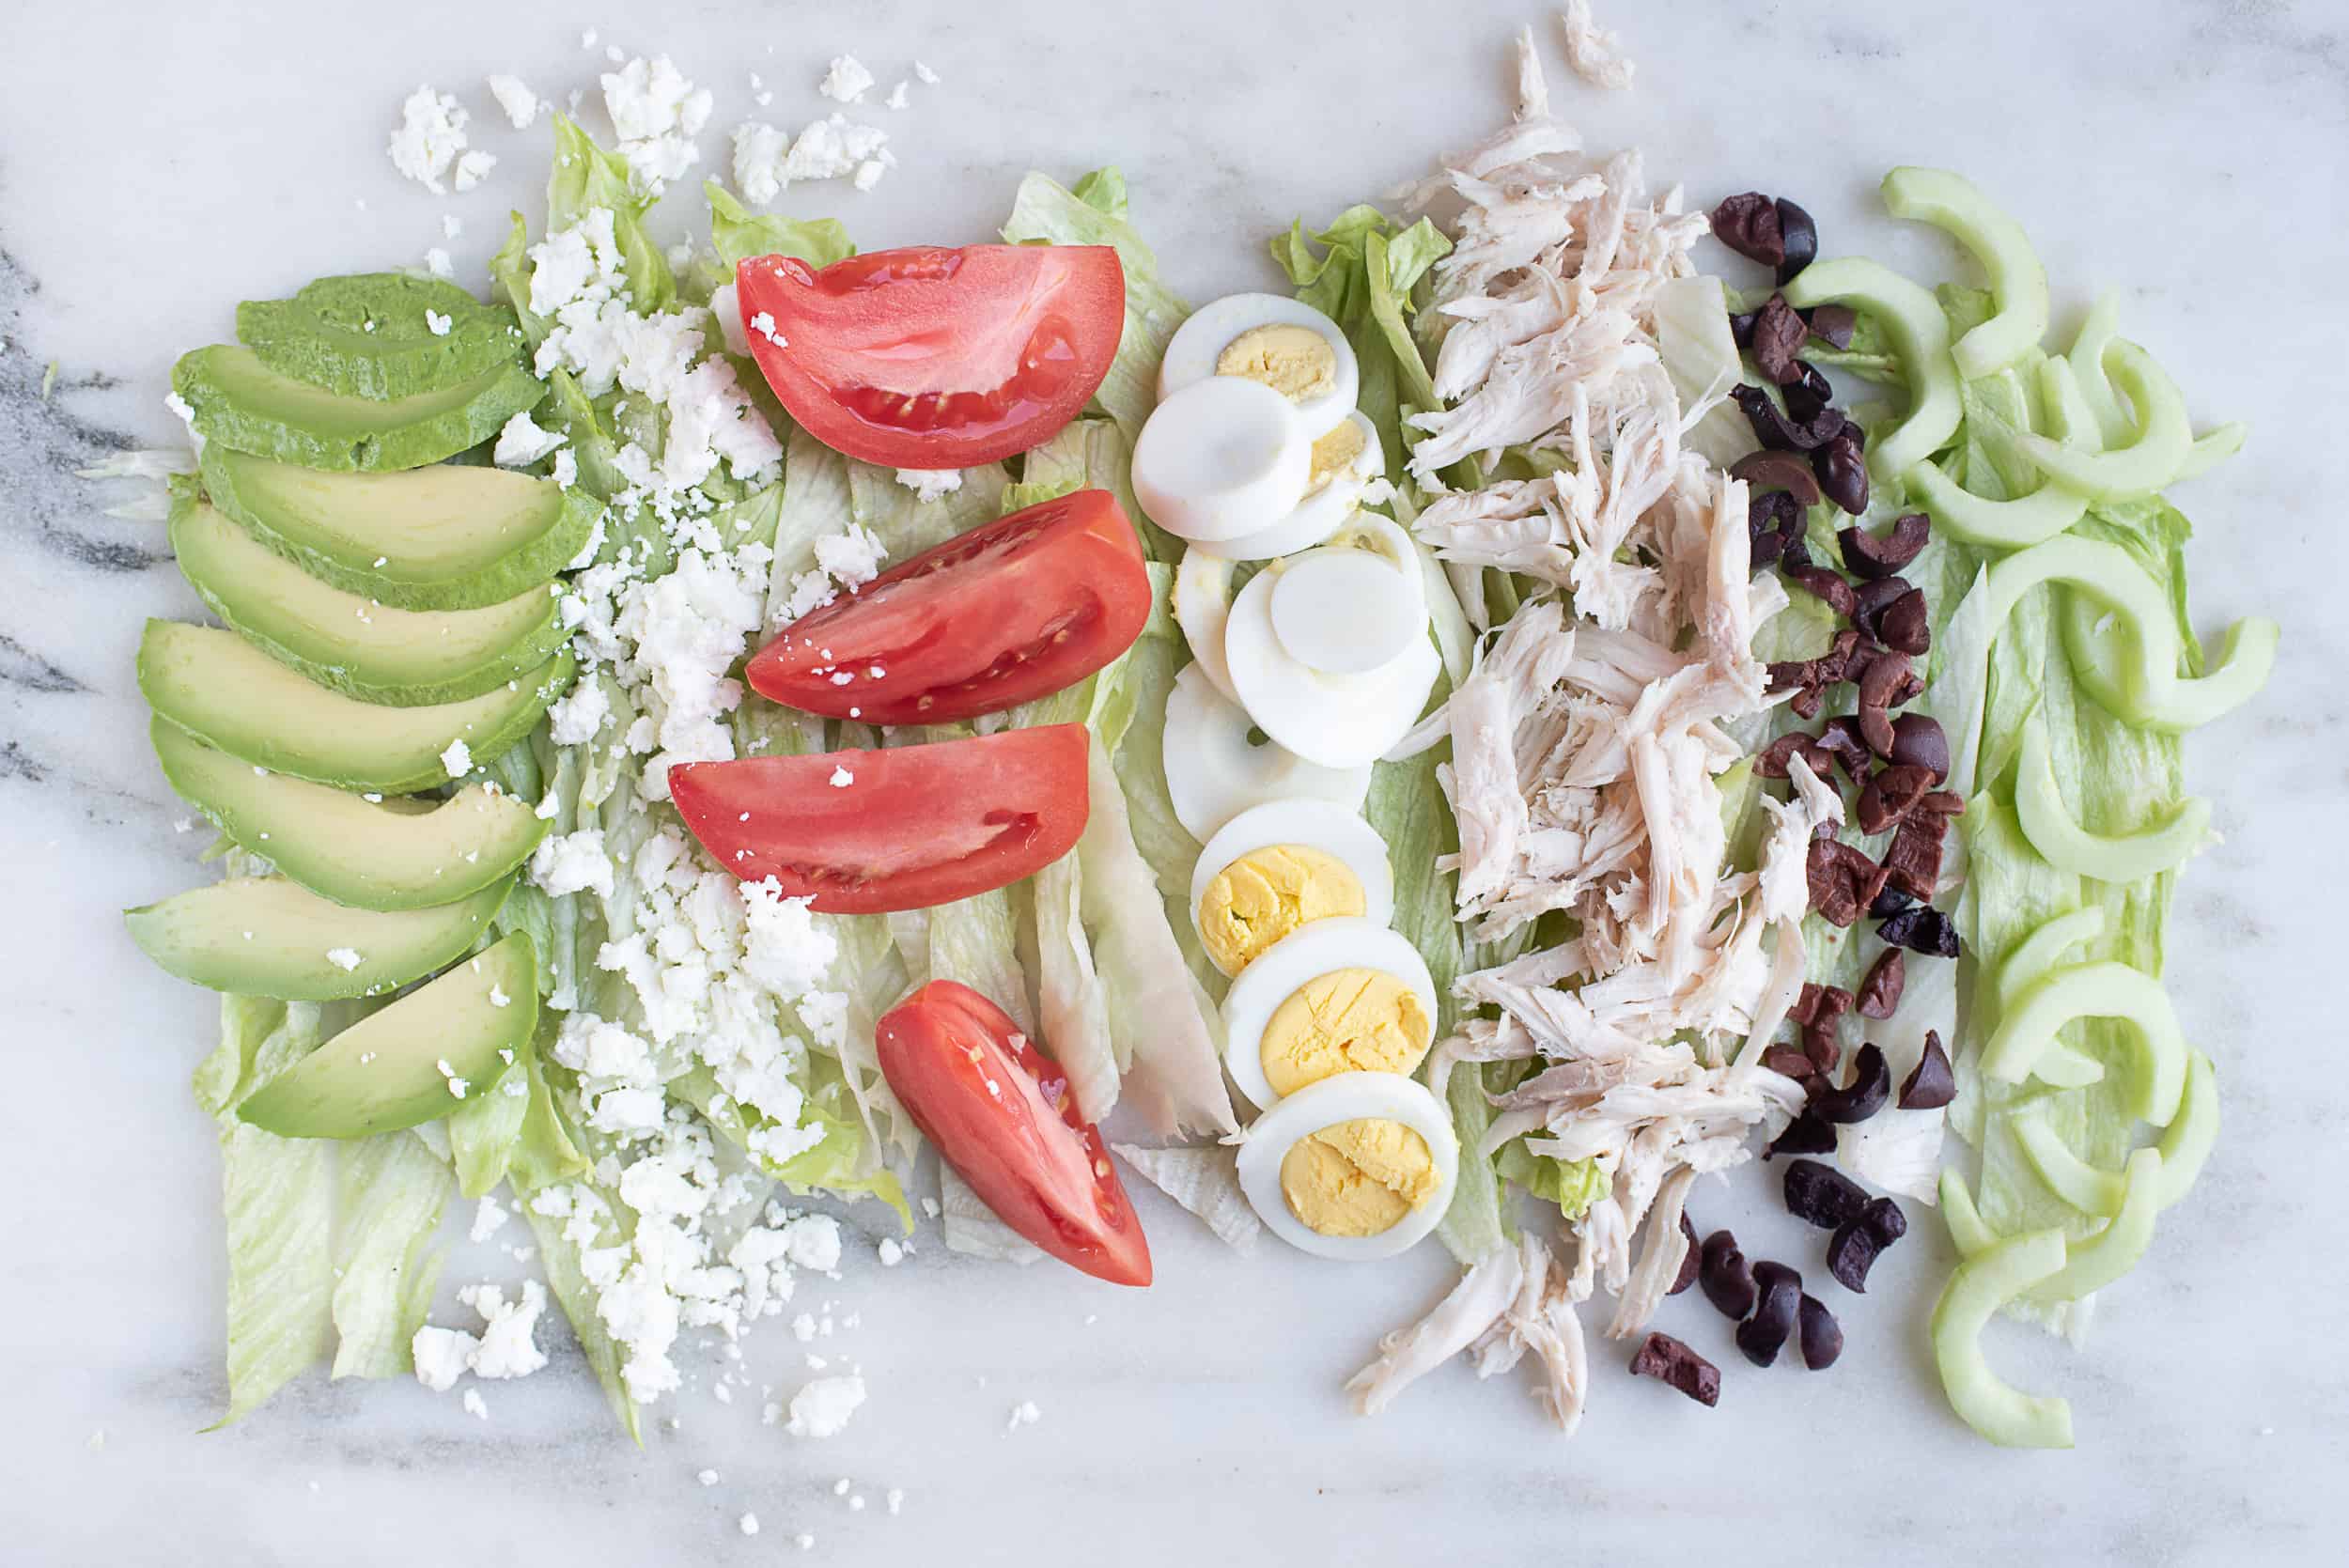 iceberg lettuce leaves sliced into ribbons, sliced hardboiled eggs, tomato wedges, shredded chicken, sliced avocado, half moon slices of cucumber, sliced olives, and crumbled goat cheese, all arranged in columns by food type, on a countertop